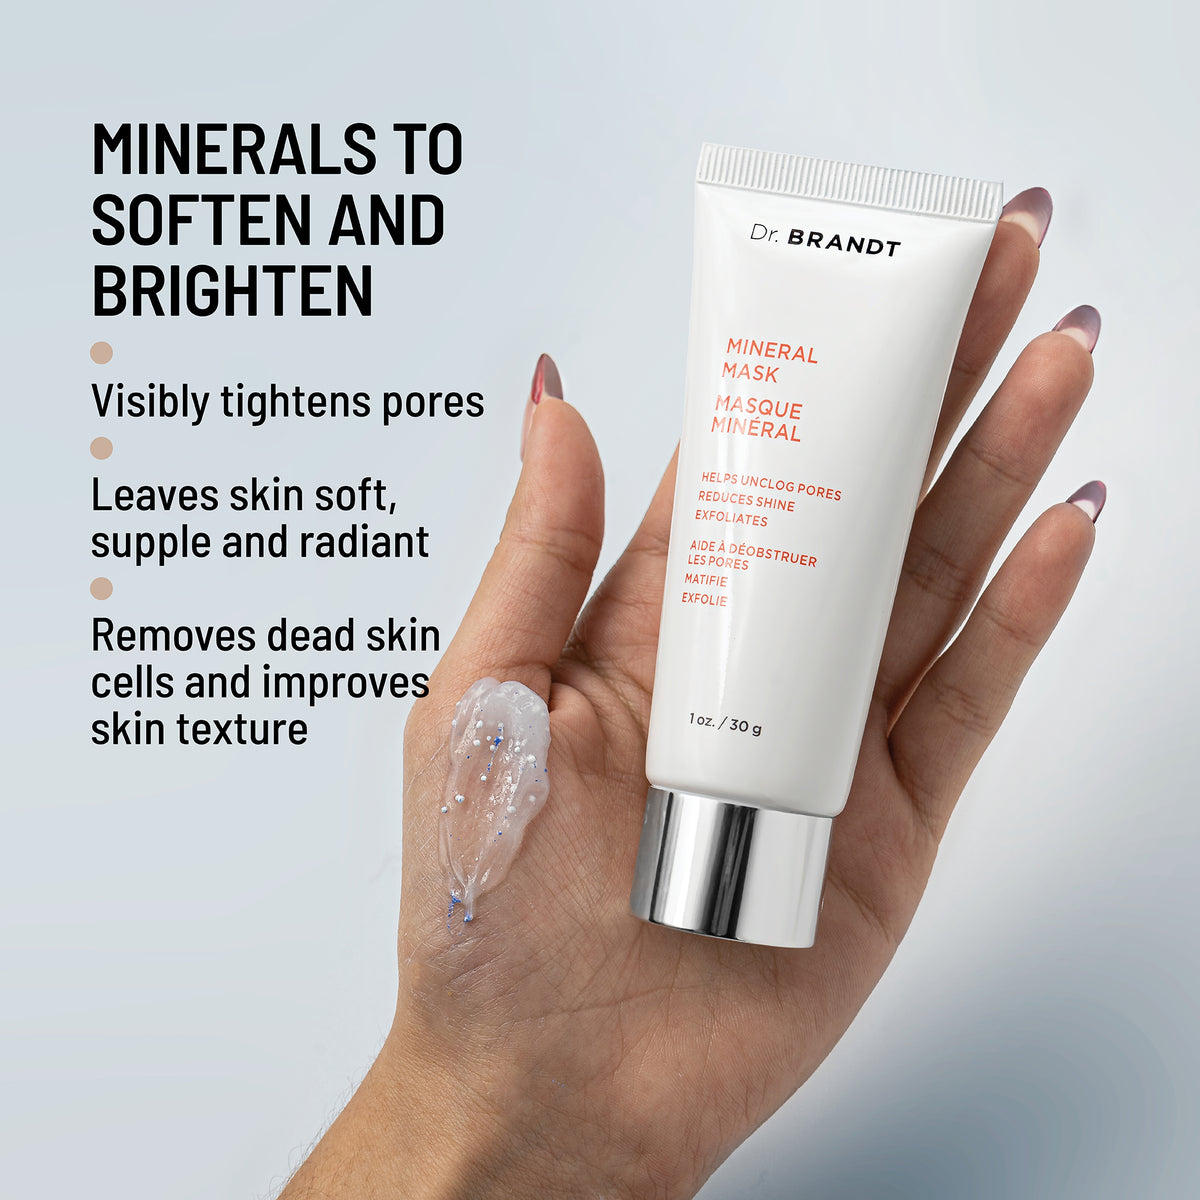 MINERAL MASK